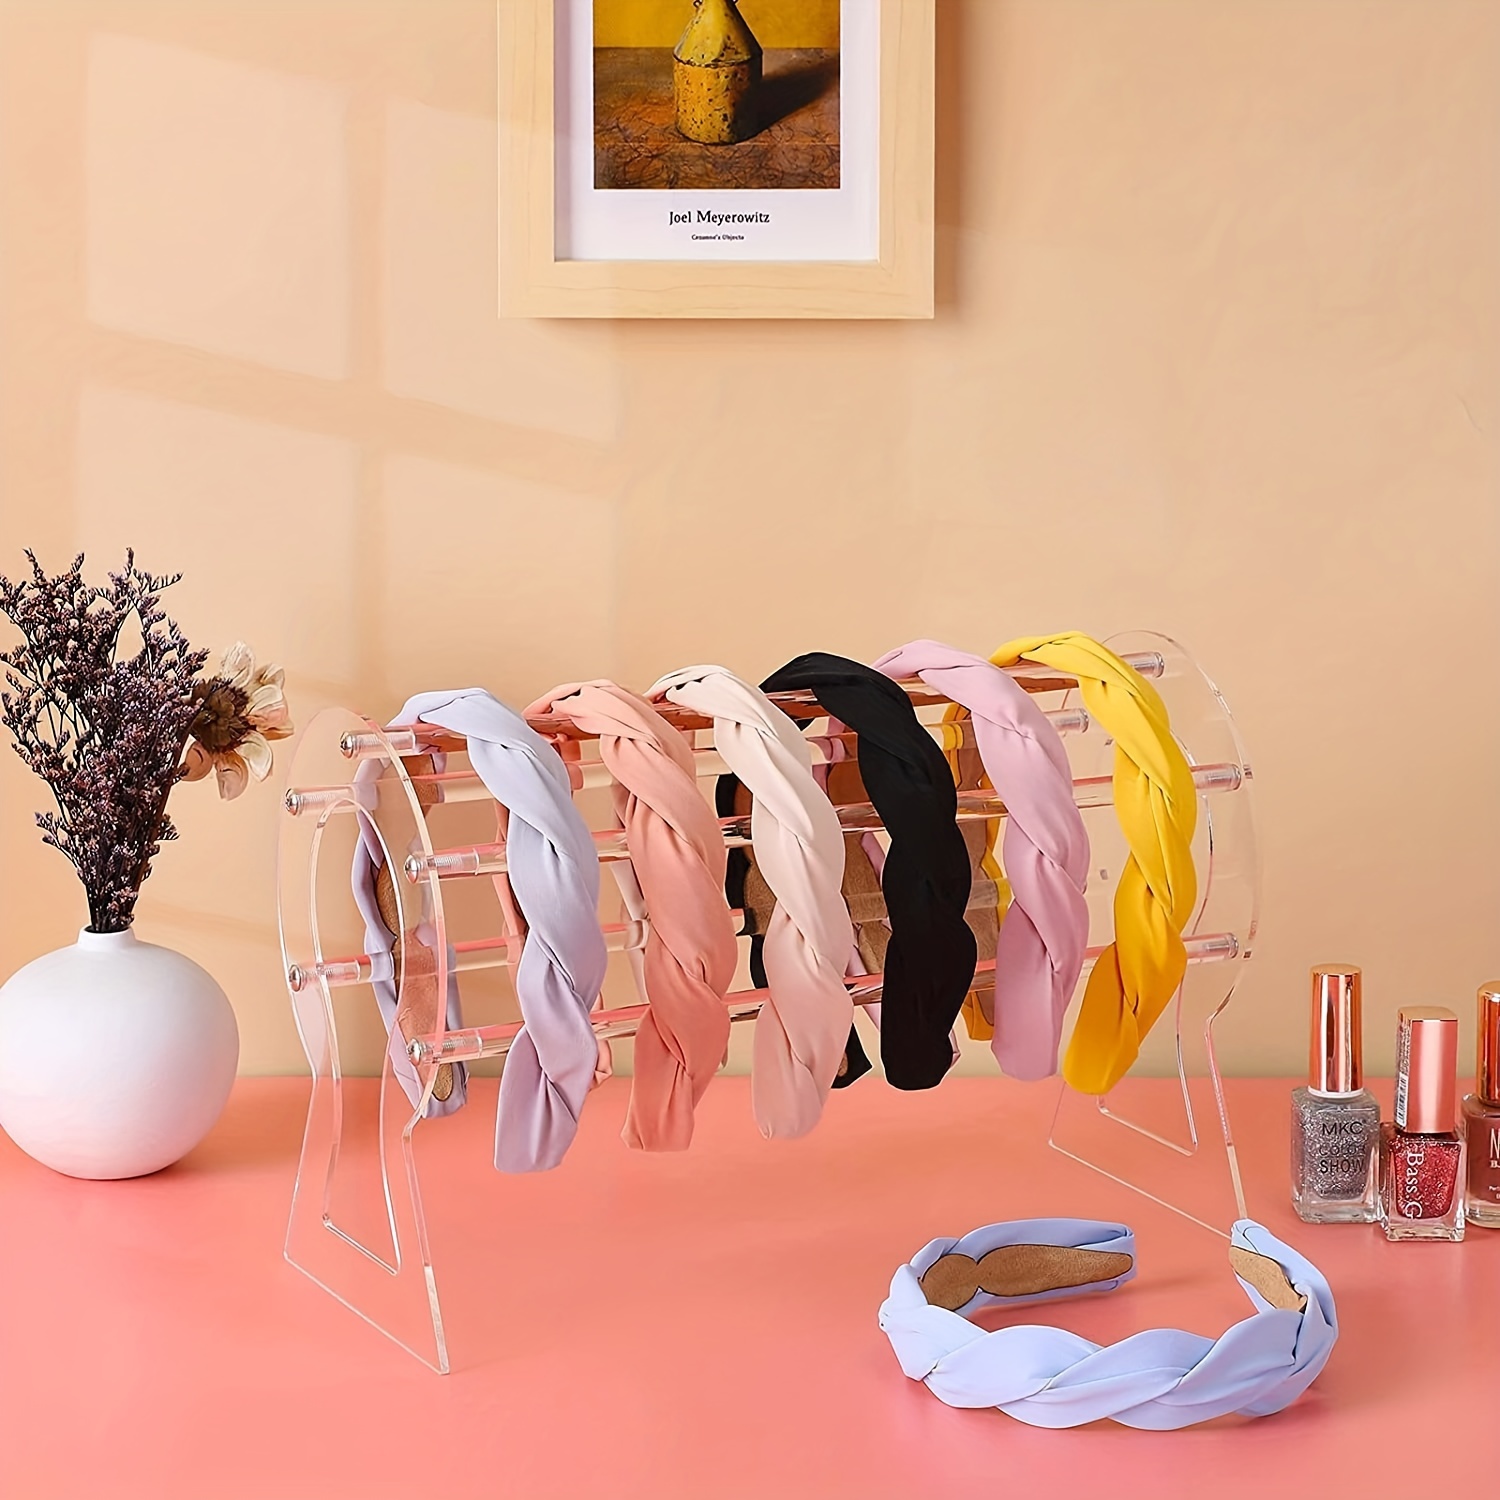 1pc Hair Clip Storage Hanging Organizer Box For Wall - Hair Accessory Holder  With Elastic Band, Hair Tie, Headband, And Scrunchies, New Style Hairpin  Claws Bag